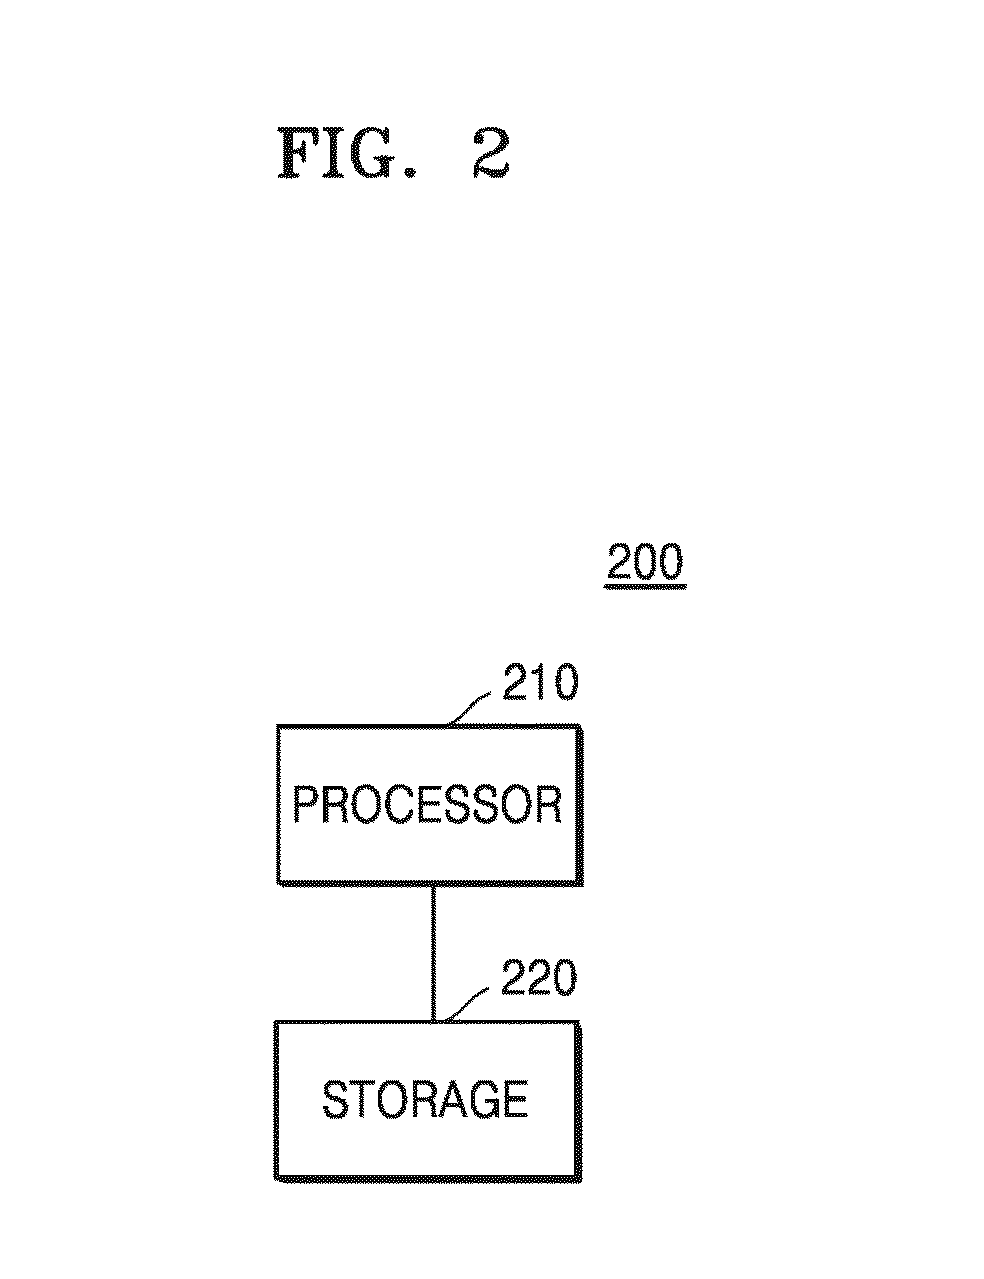 Image display system and method of fitting multiple models to image